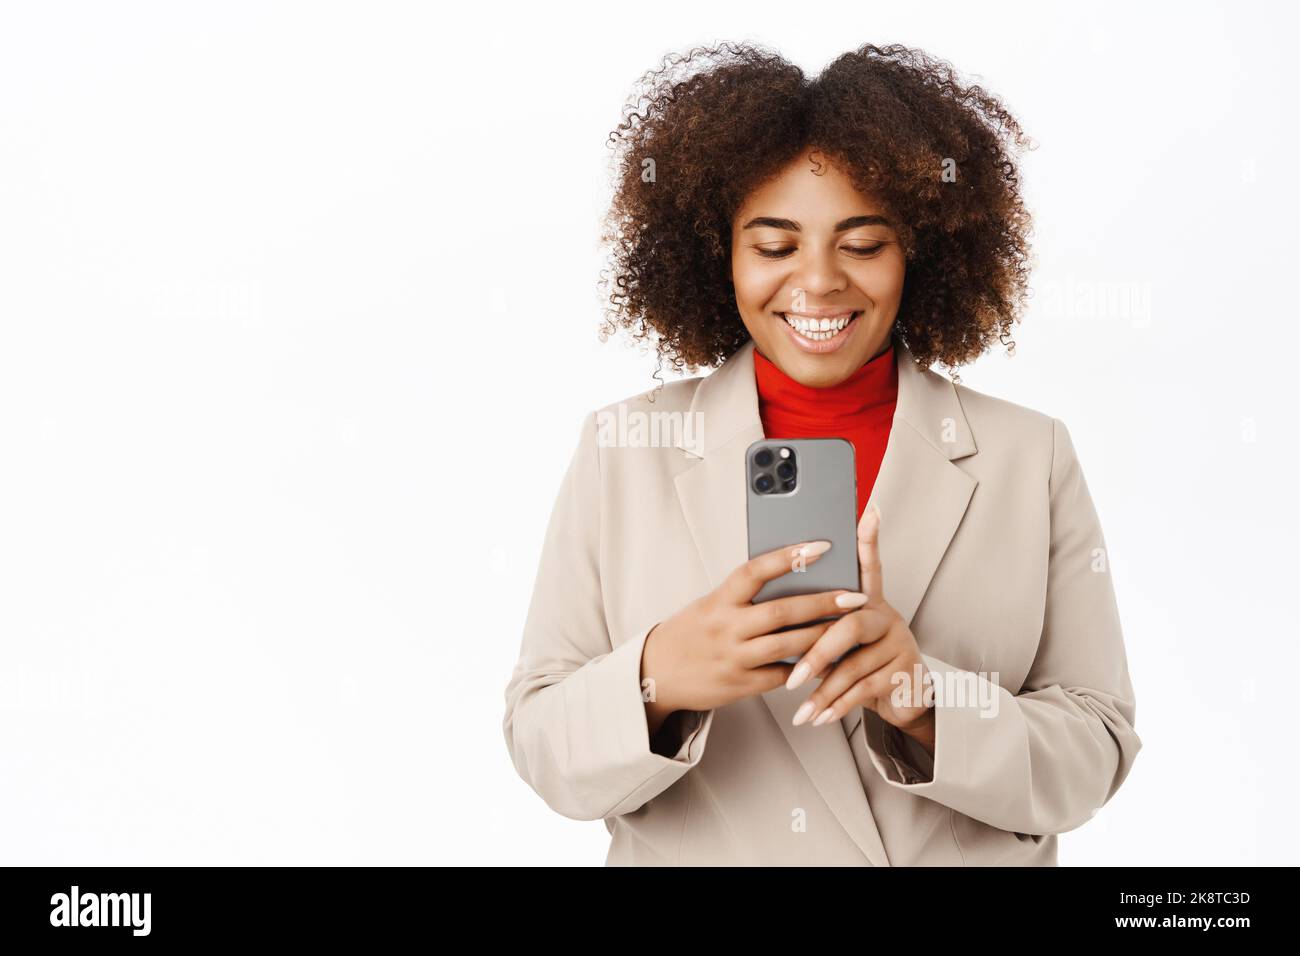 Image of smiling african american saleswoman records video on mobile phone, takes photo, shoots on smartphone, stands over white background Stock Photo